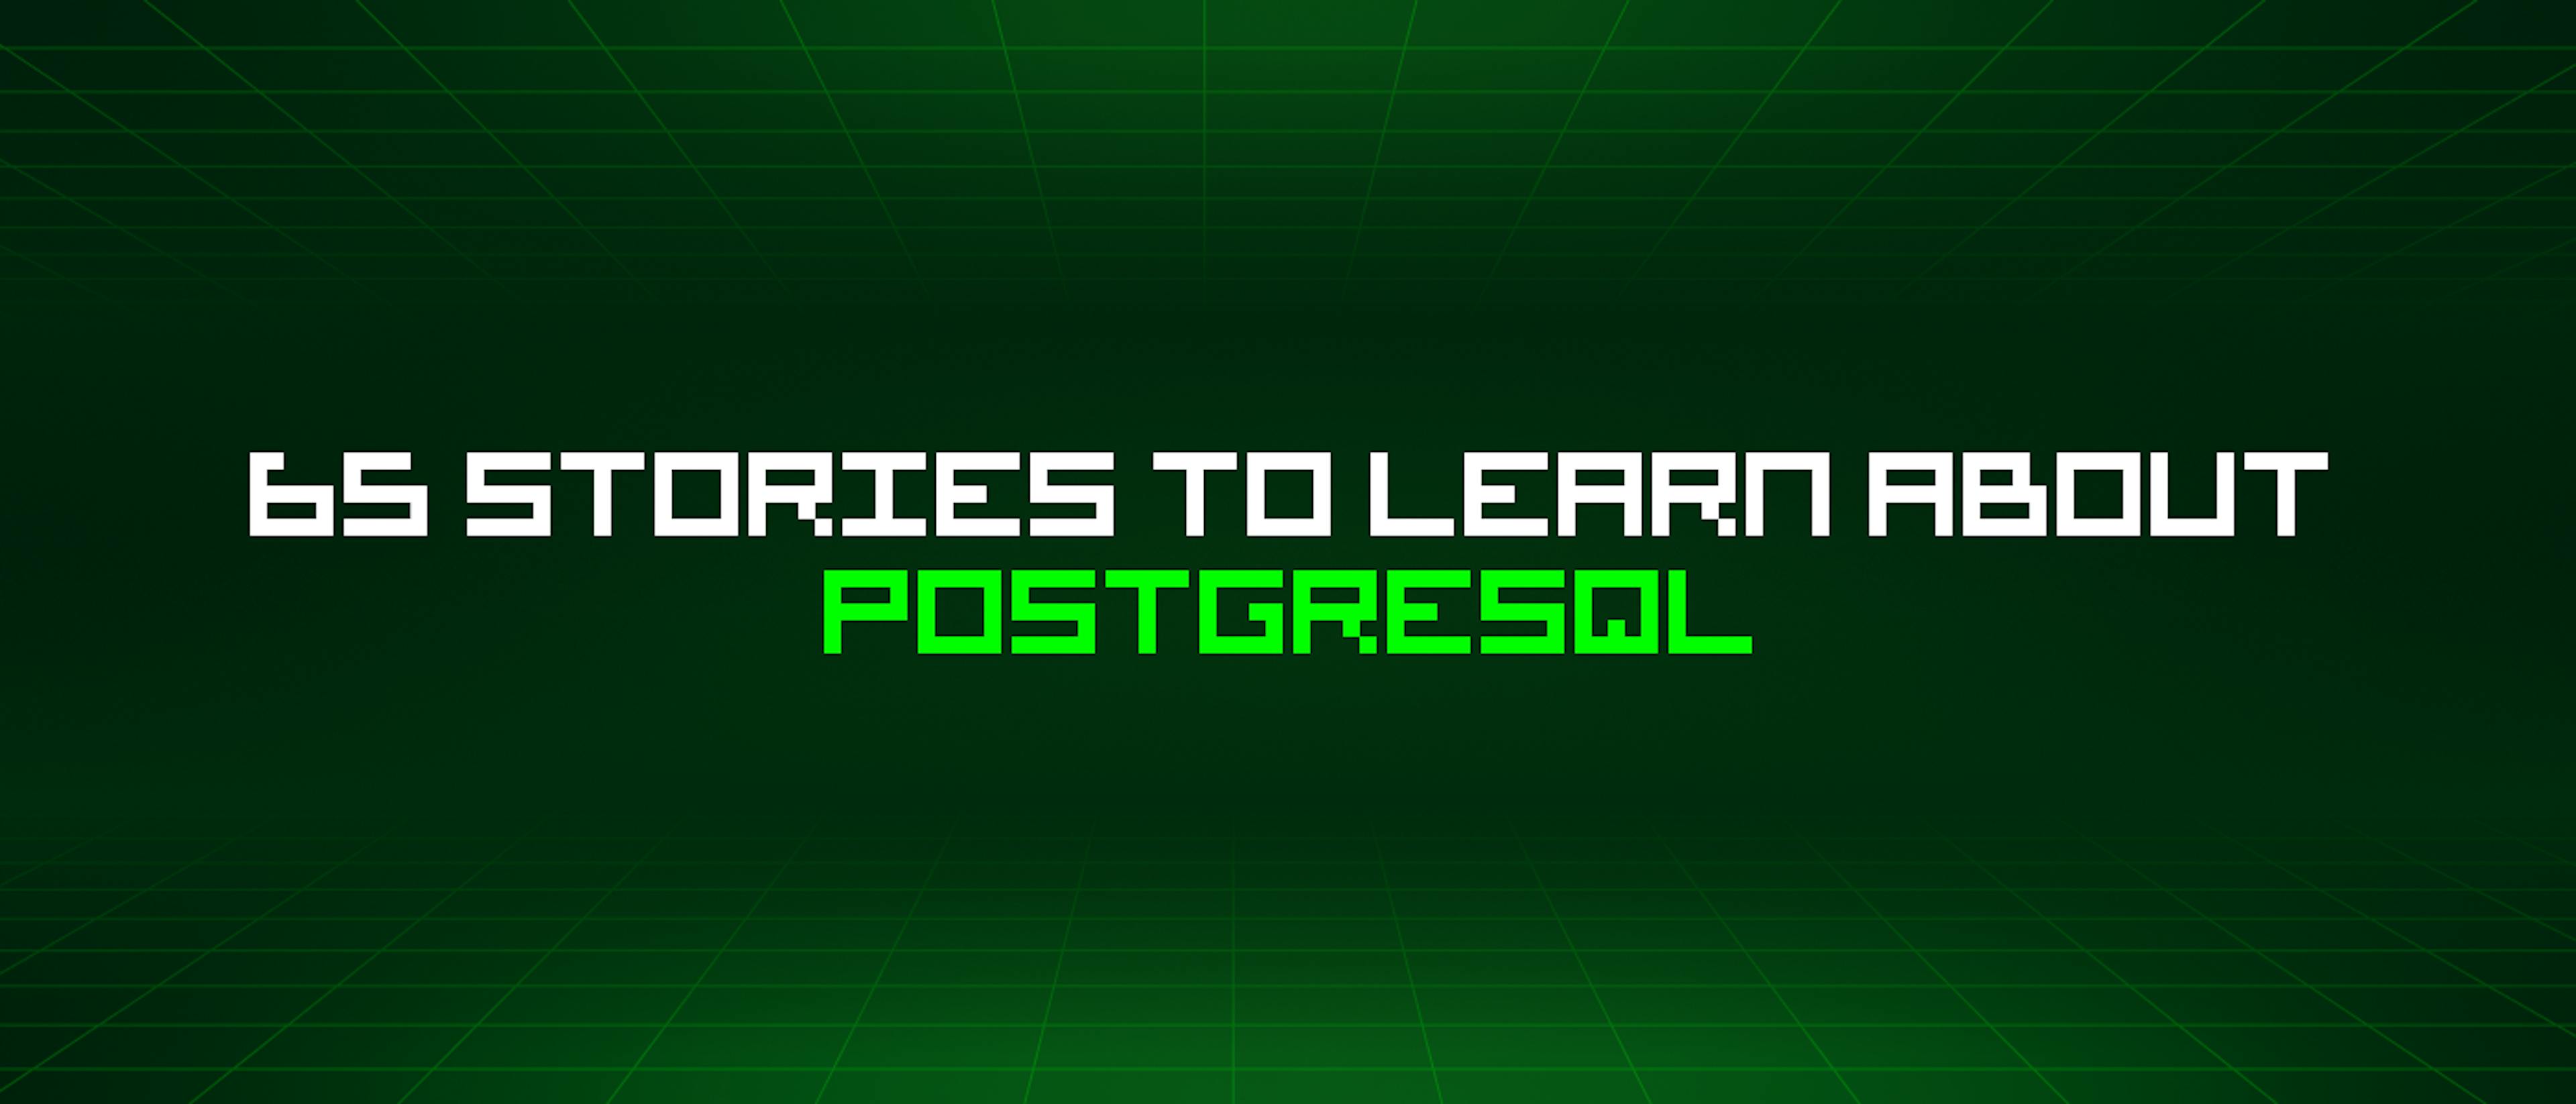 featured image - 65 Stories To Learn About Postgresql